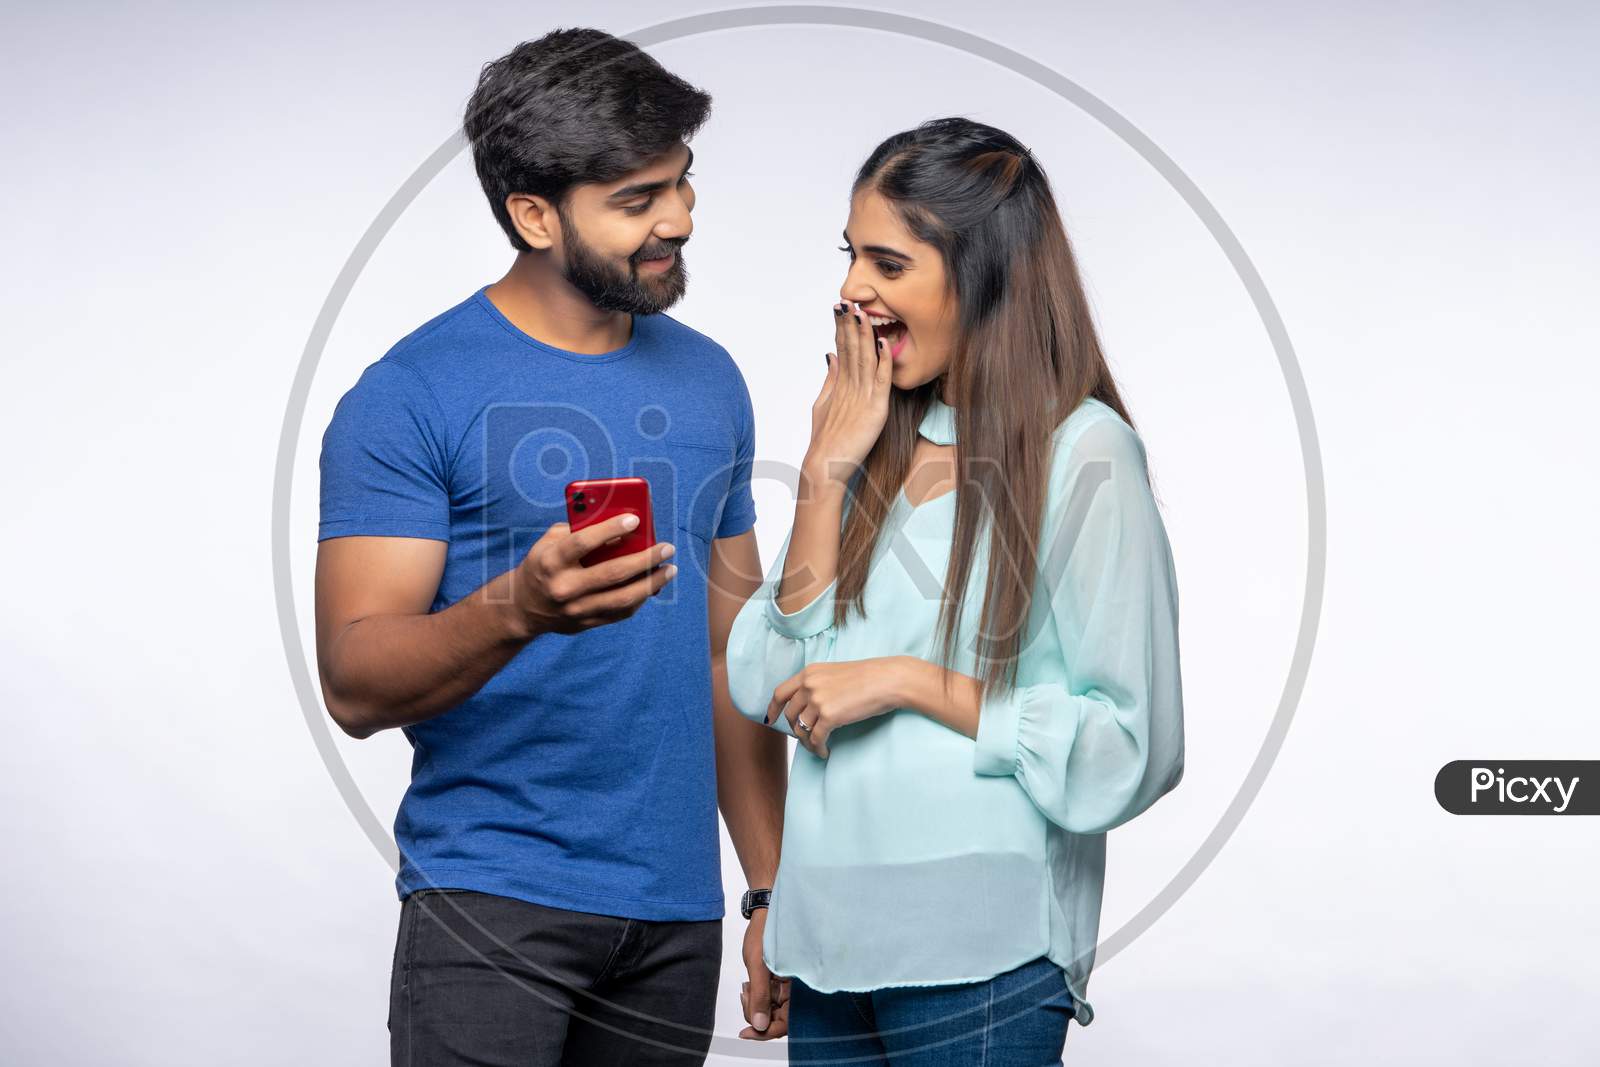 Happy Young Indian Couple making gestures while using a Smartphone.